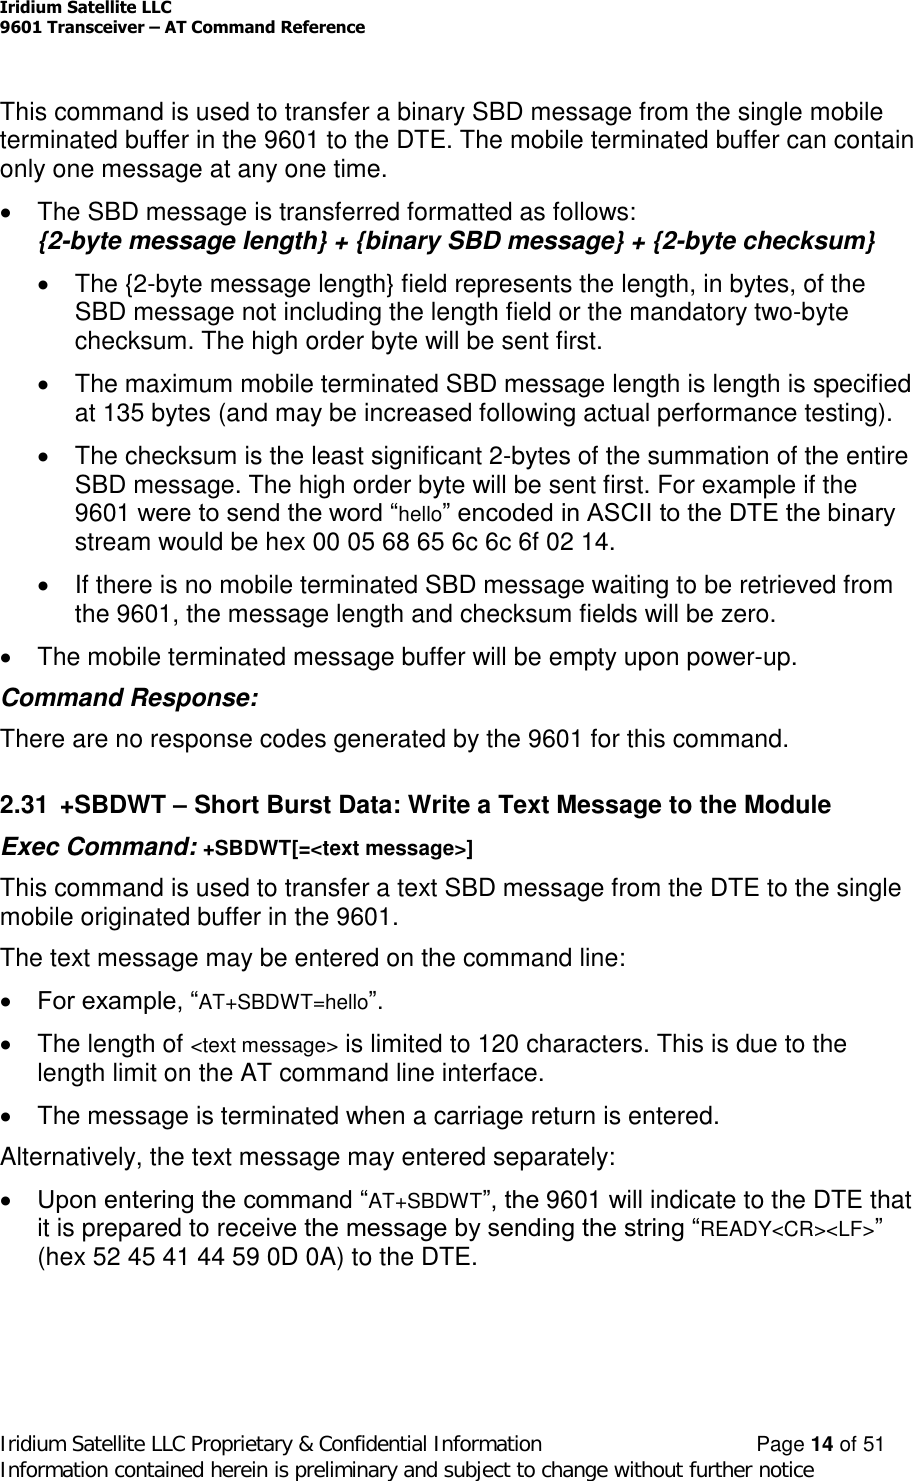 Iridium Satellite LLC9601 Transceiver –AT Command ReferenceIridium Satellite LLC Proprietary &amp; Confidential Information Page 14 of 51Information contained herein is preliminary and subject to change without further noticeThis command is used to transfer a binary SBD message from the single mobileterminated buffer in the 9601 to the DTE. The mobile terminated buffer can containonly one message at any one time.The SBD message is transferred formatted as follows:{2-byte message length} + {binary SBD message} + {2-byte checksum}The {2-byte message length} field represents the length, in bytes, of theSBD message not including the length field or the mandatory two-bytechecksum. The high order byte will be sent first.The maximum mobile terminated SBD message length is length is specifiedat 135 bytes (and may be increased following actual performance testing).The checksum is the least significant 2-bytes of the summation of the entireSBD message. The high order byte will be sent first. For example if the9601 were to send the word “hello” encoded in ASCII to the DTE the binary stream would be hex 00 05 68 65 6c 6c 6f 02 14.If there is no mobile terminated SBD message waiting to be retrieved fromthe 9601, the message length and checksum fields will be zero.The mobile terminated message buffer will be empty upon power-up.Command Response:There are no response codes generated by the 9601 for this command.2.31 +SBDWT –Short Burst Data: Write a Text Message to the ModuleExec Command: +SBDWT[=&lt;text message&gt;]This command is used to transfer a text SBD message from the DTE to the singlemobile originated buffer in the 9601.The text message may be entered on the command line:For example, “AT+SBDWT=hello”.The length of &lt;text message&gt; is limited to 120 characters. This is due to thelength limit on the AT command line interface.The message is terminated when a carriage return is entered.Alternatively, the text message may entered separately:Upon entering the command “AT+SBDWT”, the 9601 will indicate to the DTE thatit is prepared to receive the message by sending the string “READY&lt;CR&gt;&lt;LF&gt;” (hex 52 45 41 44 59 0D 0A) to the DTE.